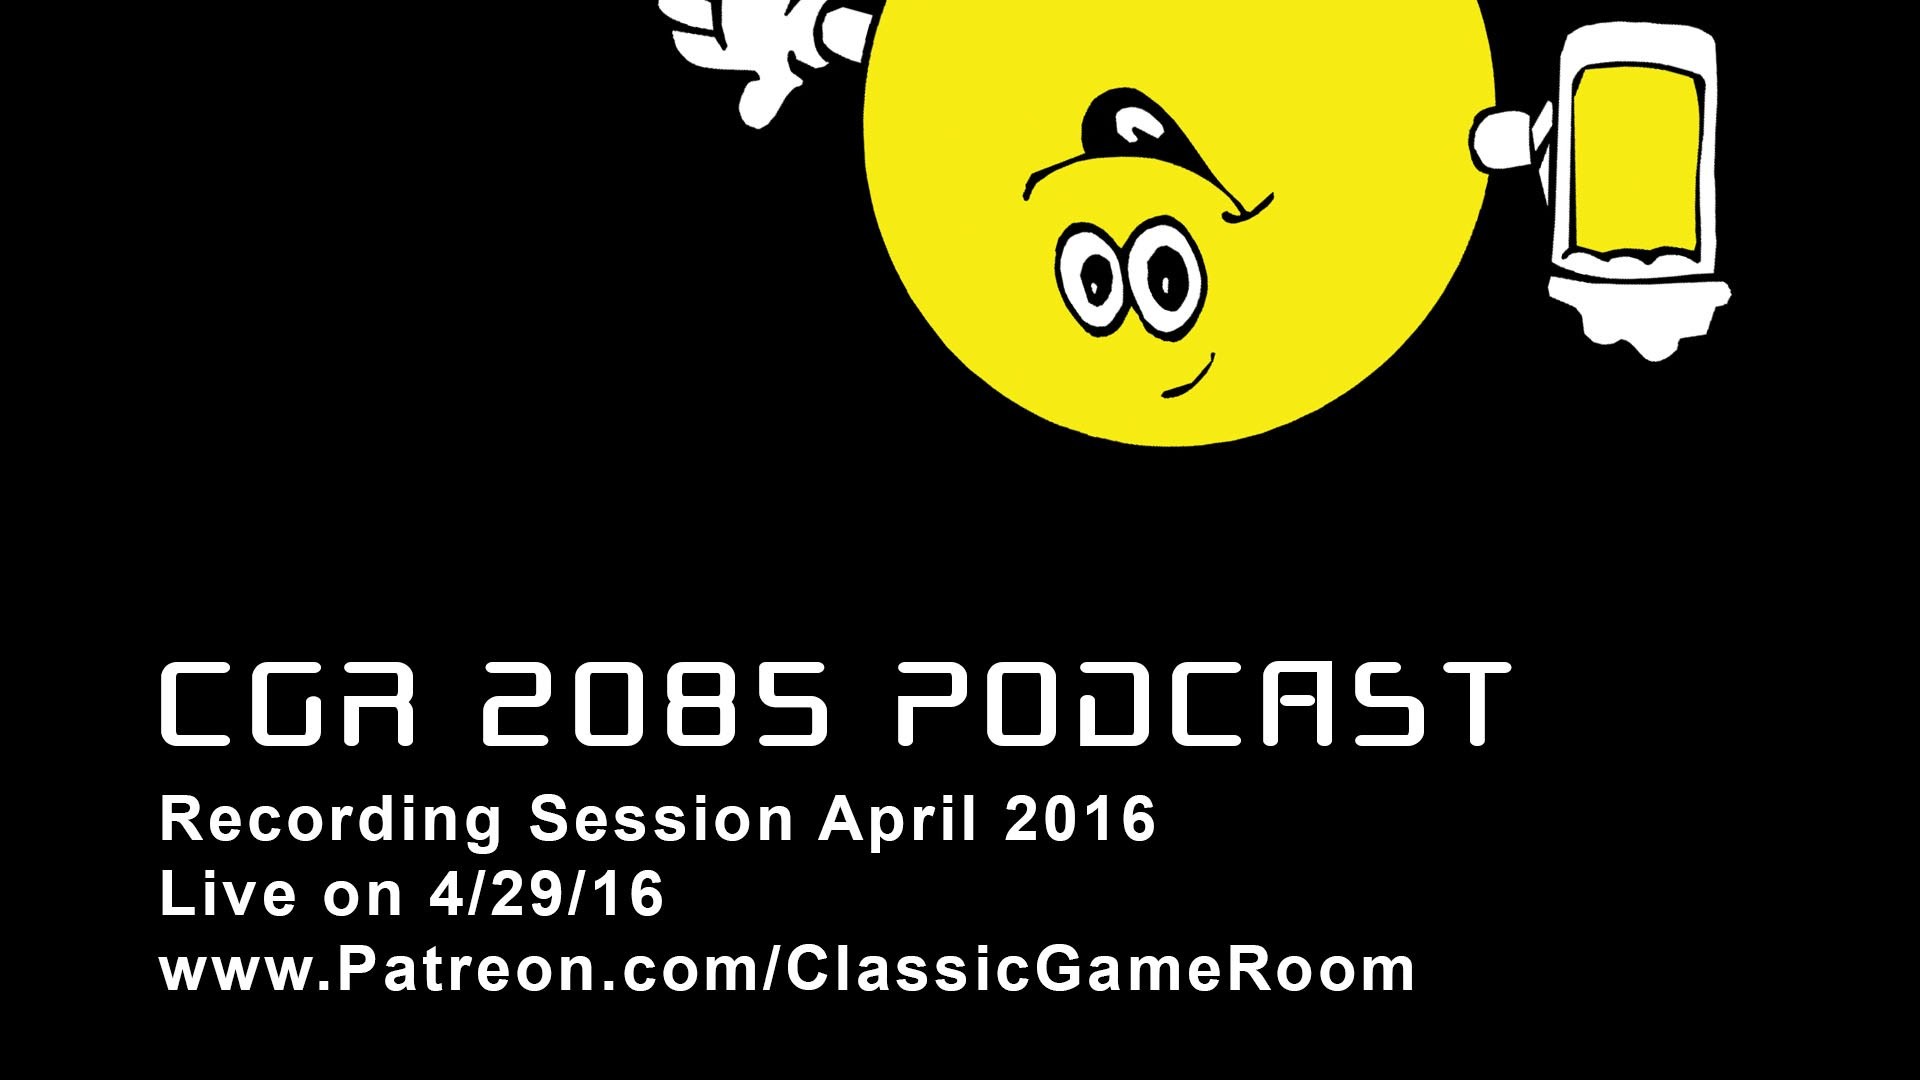 1920x1080 Classic Game Room - CGR 2085 PODCAST 80s Cartoons Recording Session